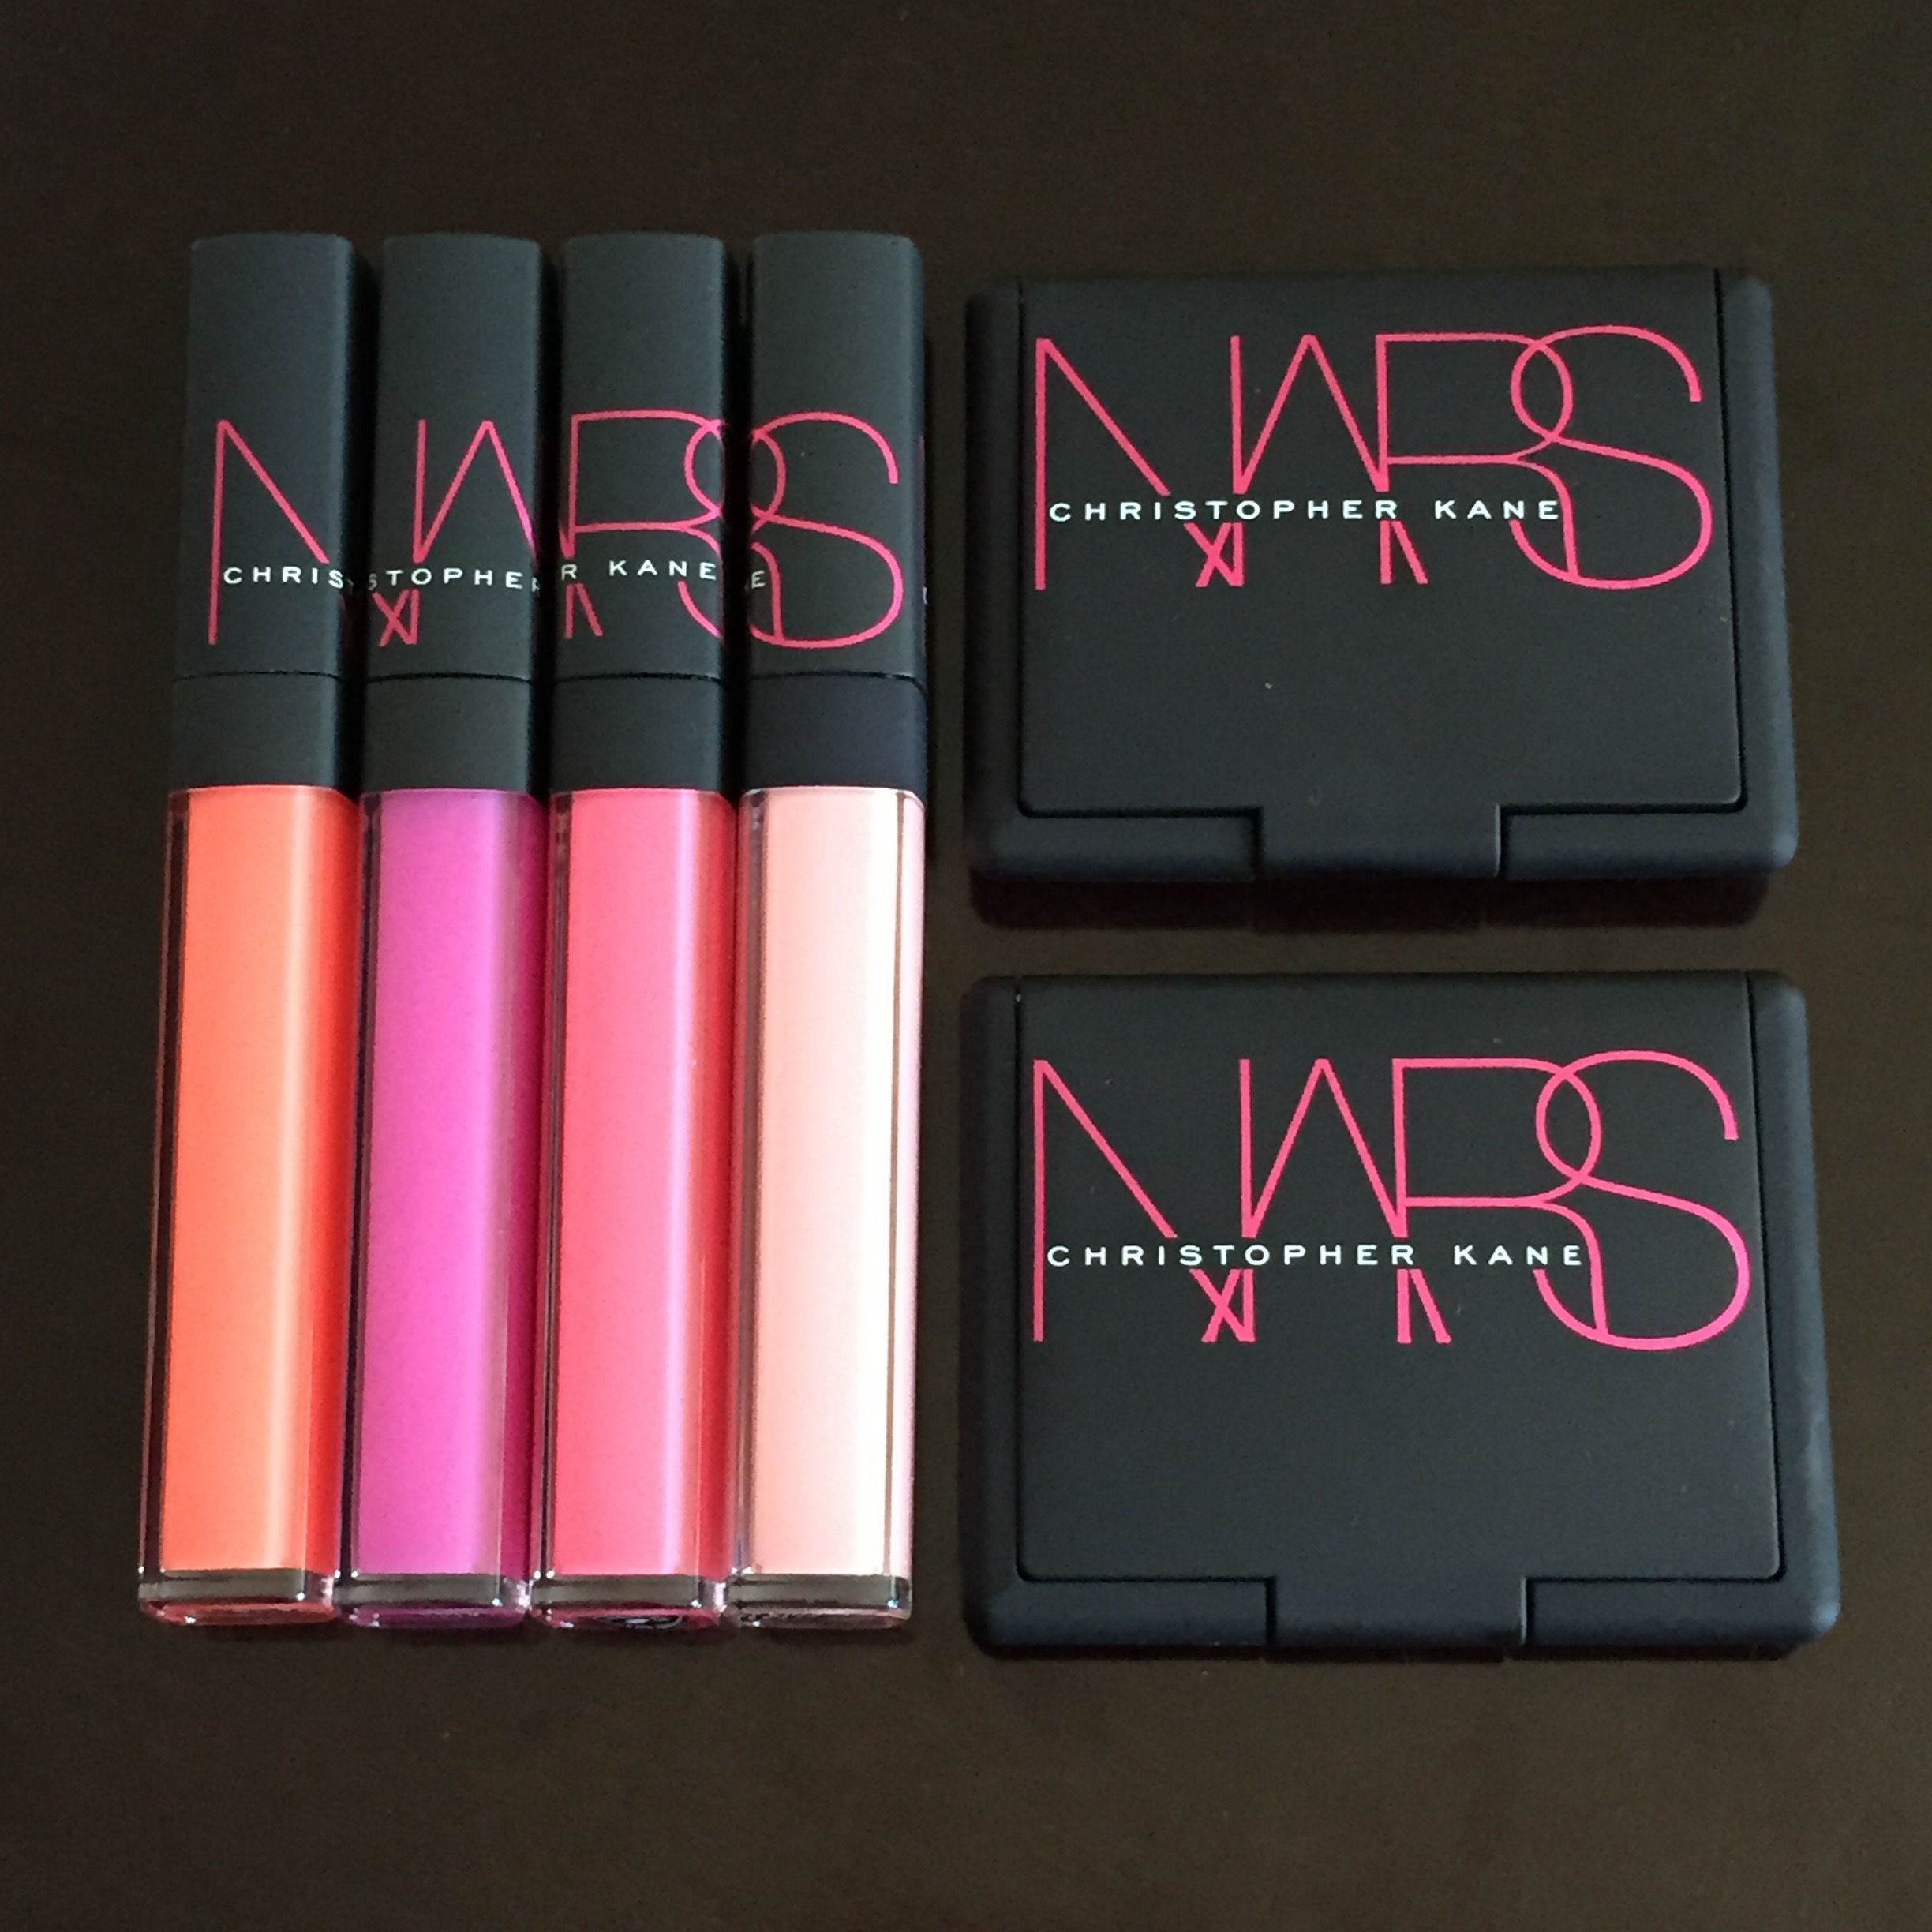 PICK OF THE DAY: NARS CHRISTOPHER KANE